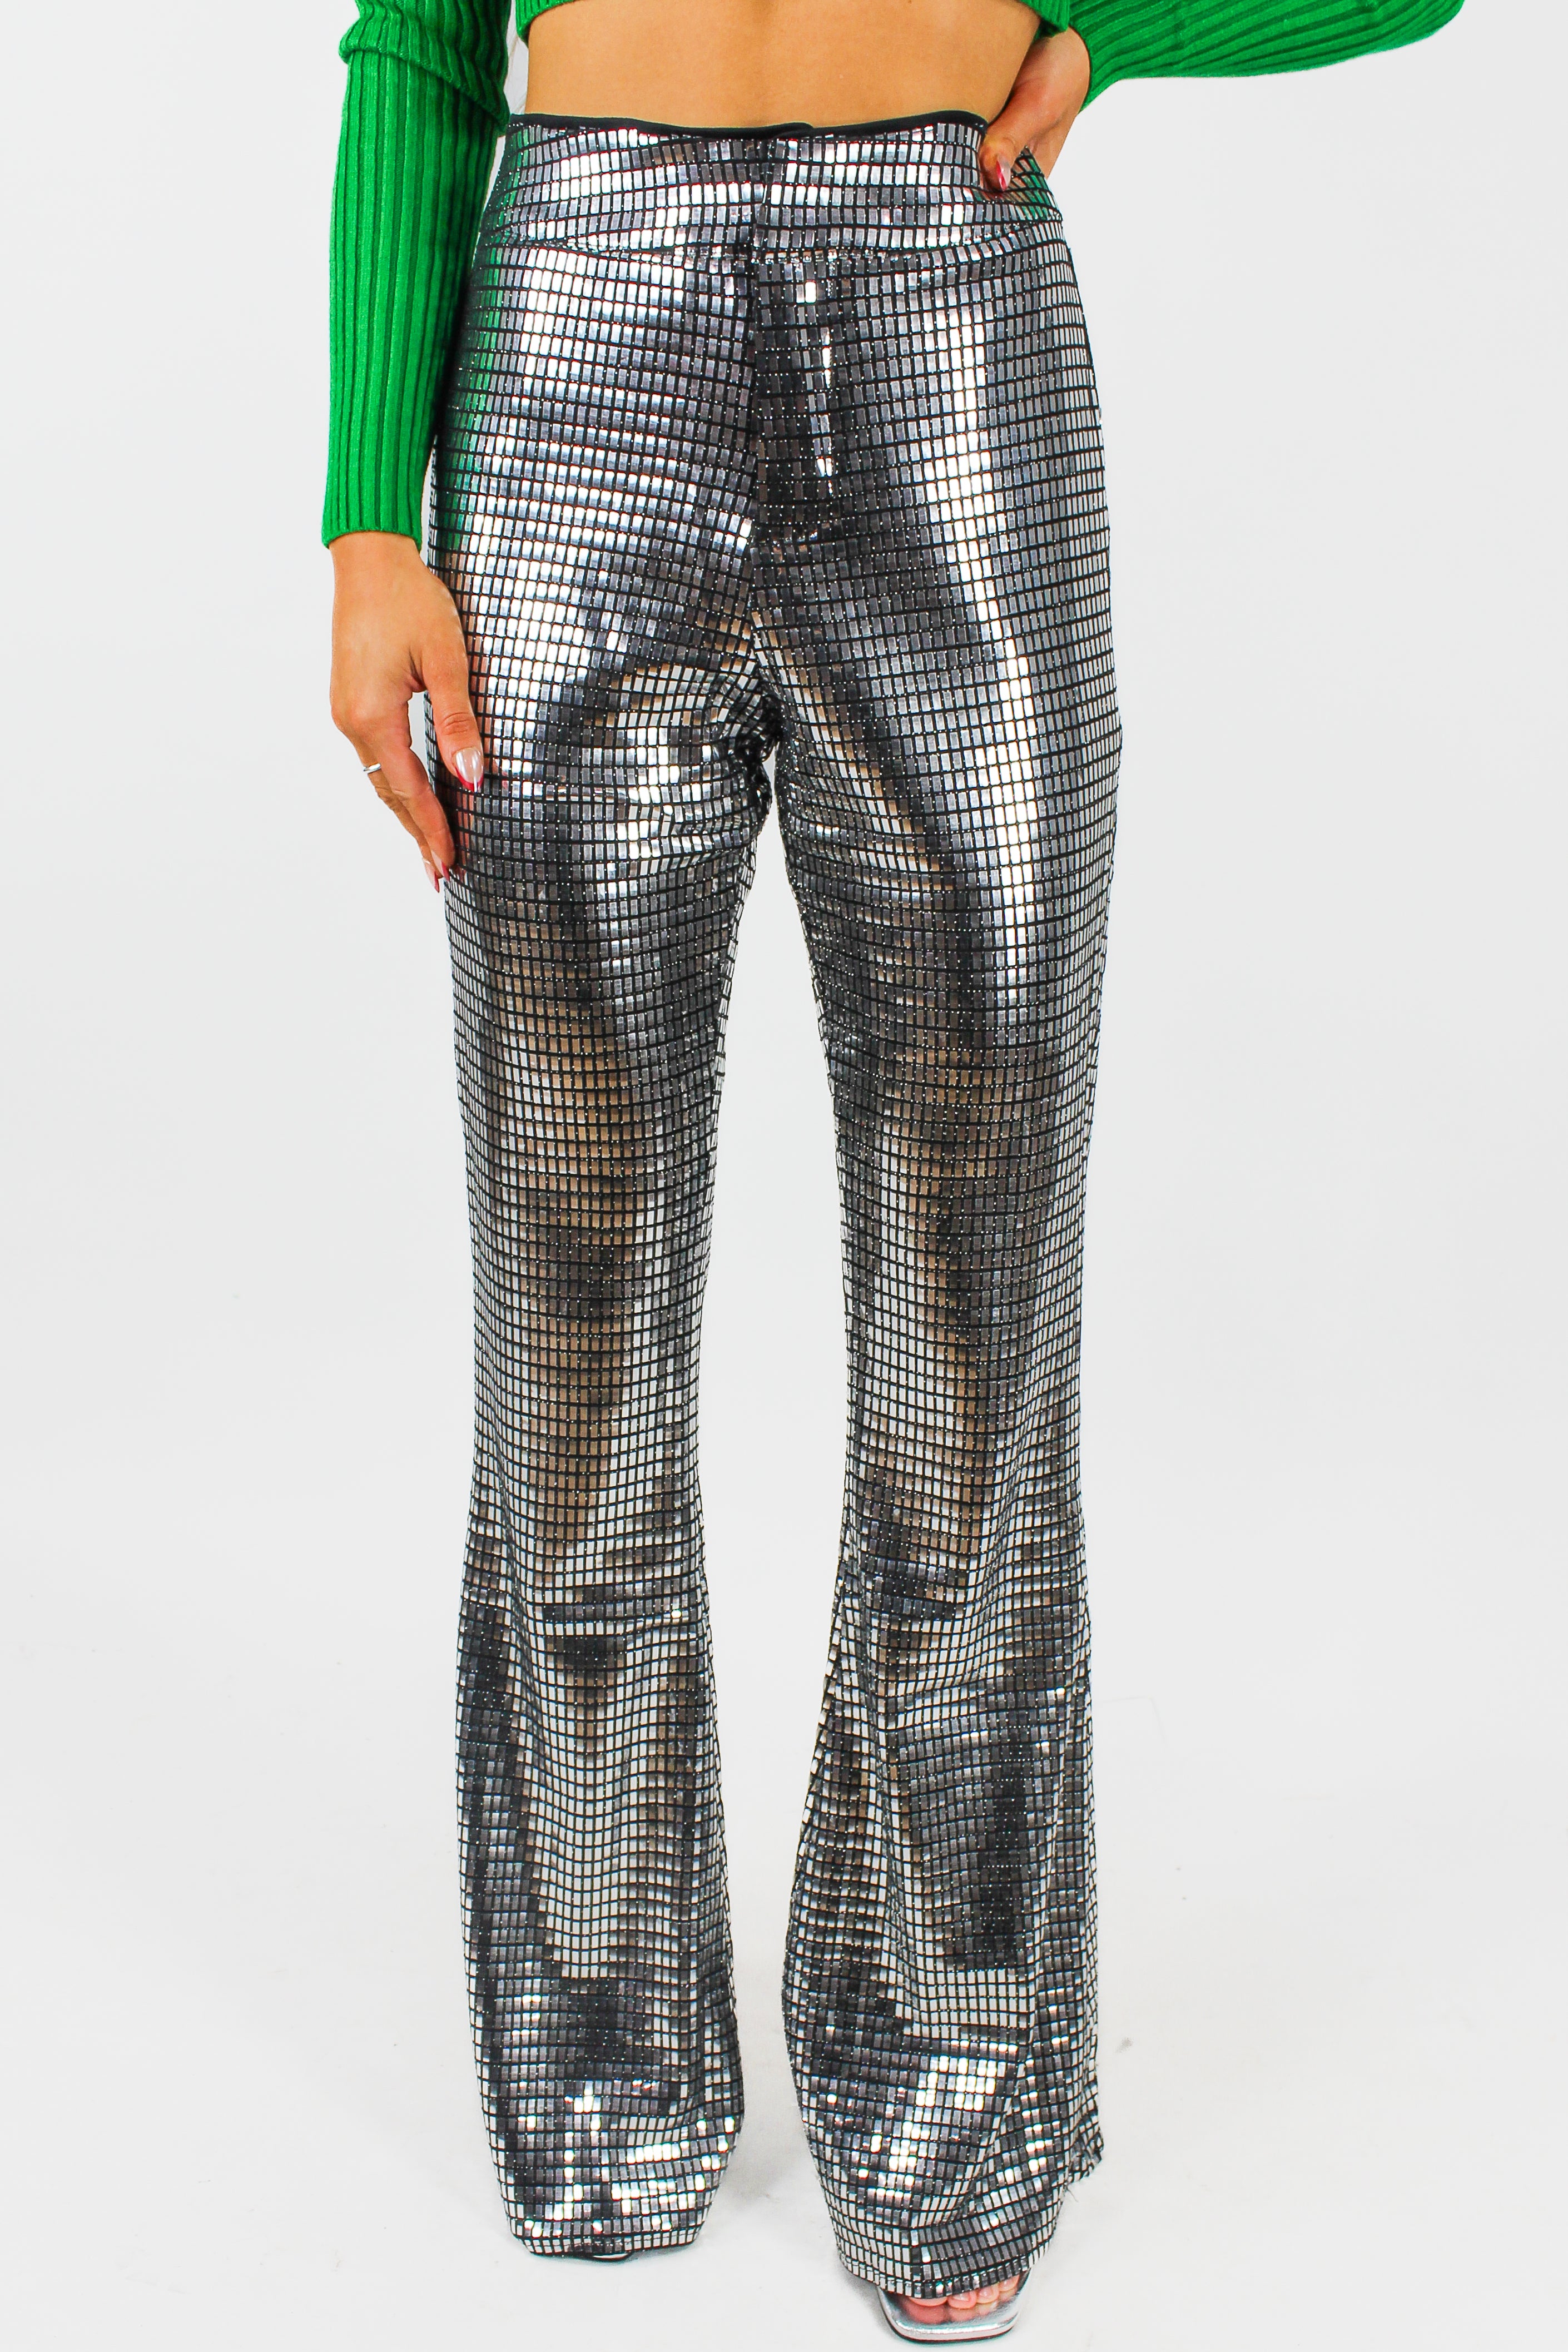 Deep in Motion Sequin Flare Pants - Frock Candy